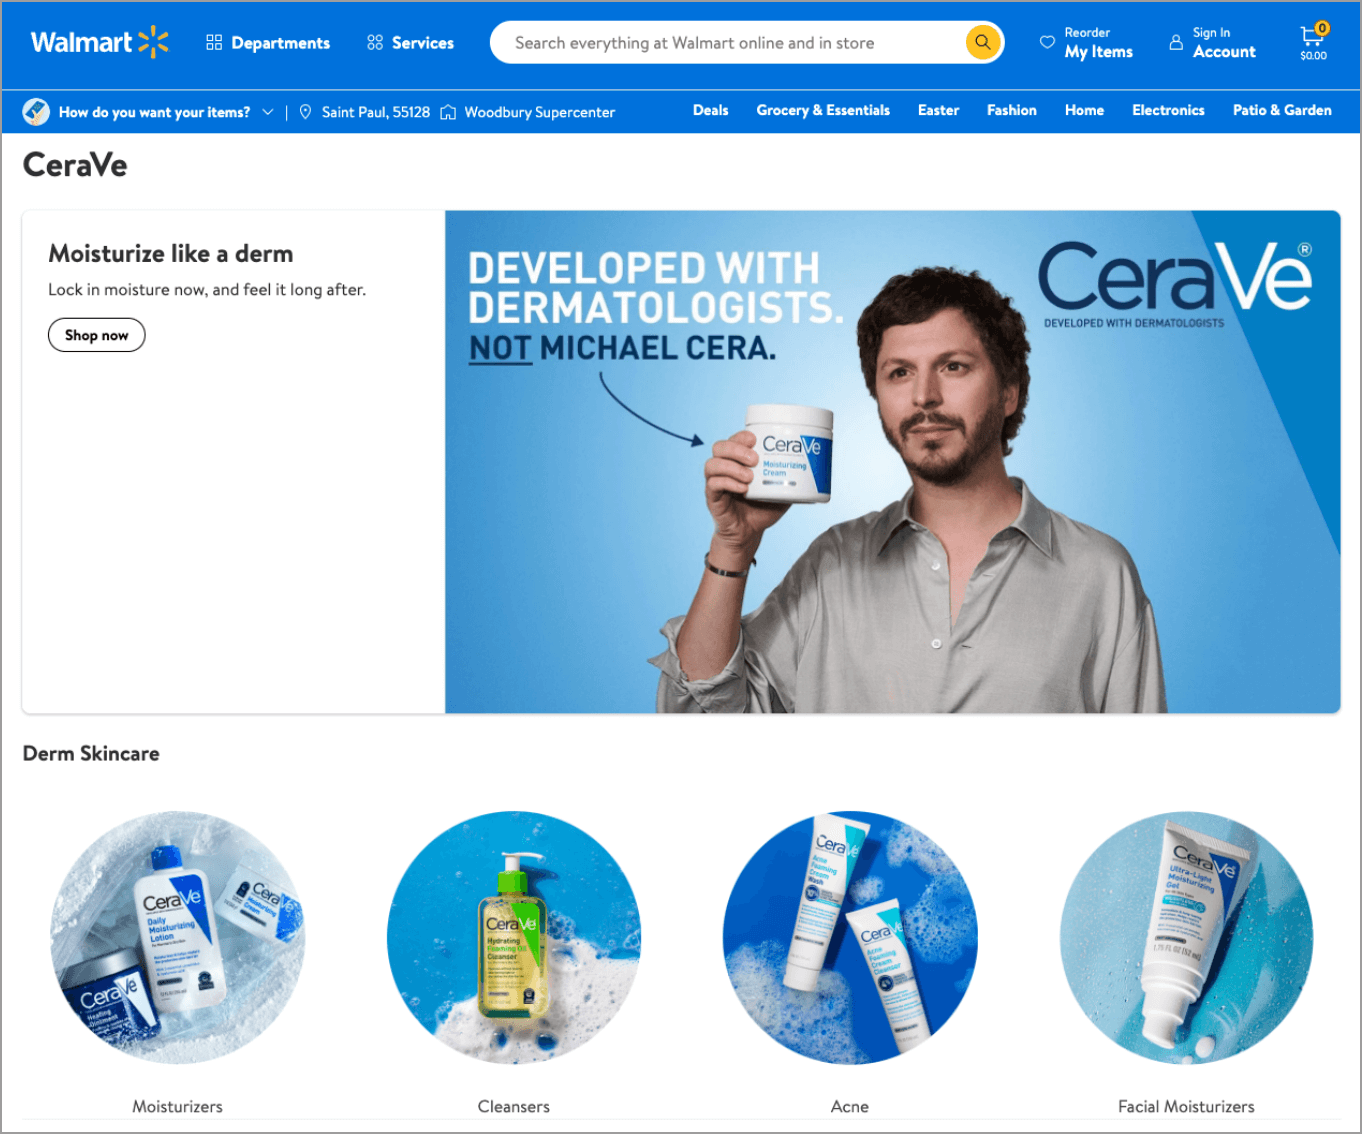 Walmart brand page Cera promoting Cerave product